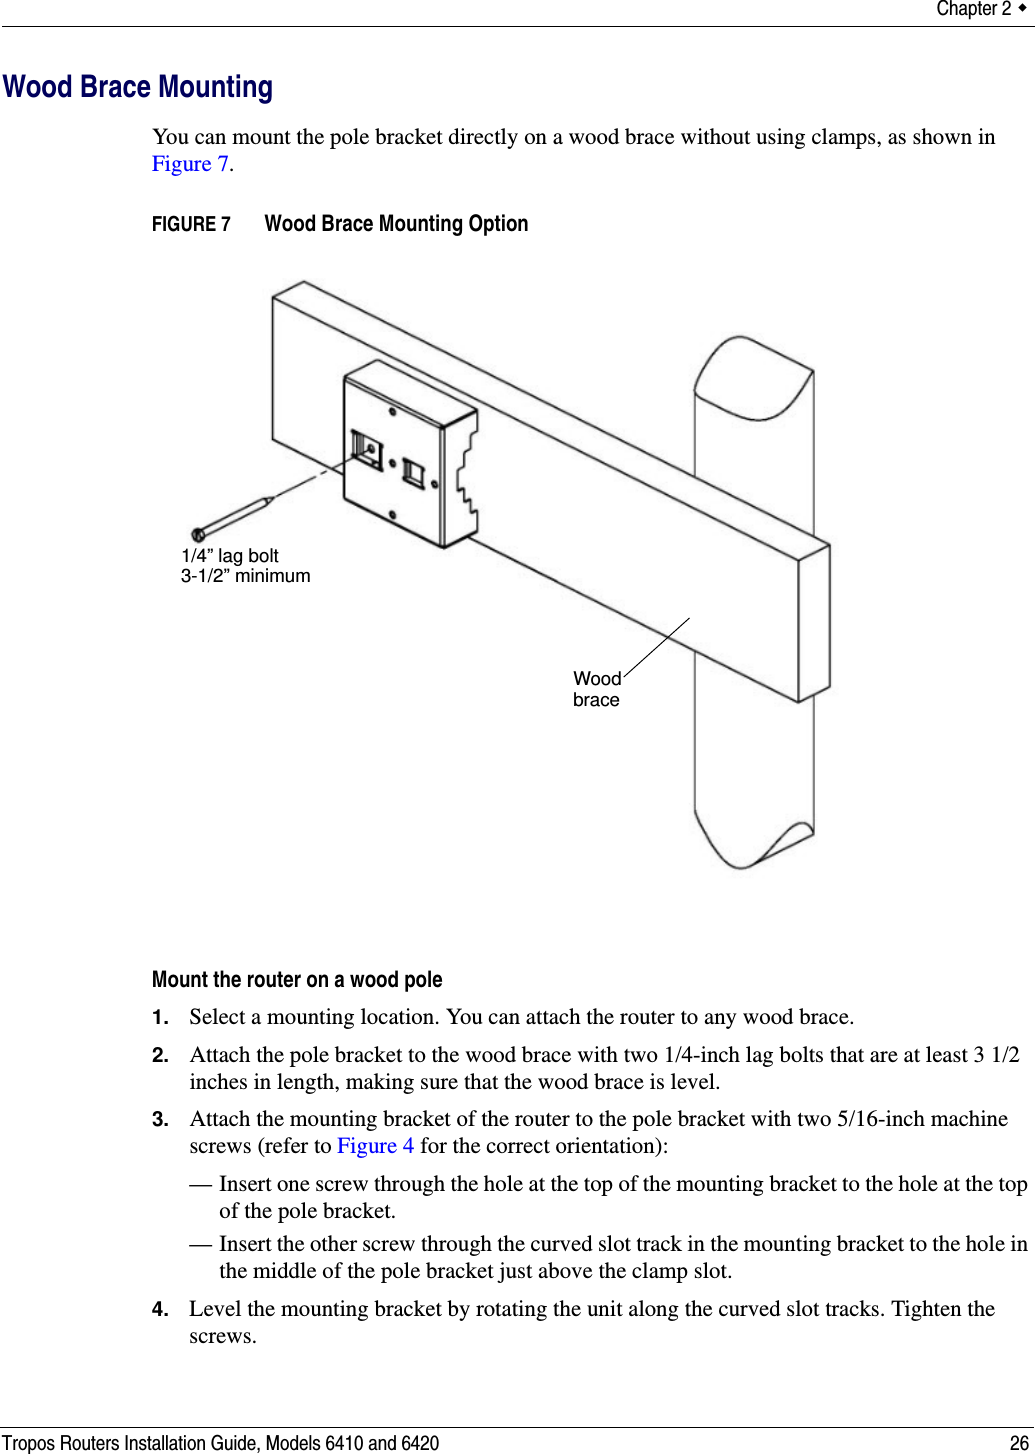 Chapter 2  Tropos Routers Installation Guide, Models 6410 and 6420 26Wood Brace MountingYou can mount the pole bracket directly on a wood brace without using clamps, as shown in Figure 7.FIGURE 7   Wood Brace Mounting OptionMount the router on a wood pole1. Select a mounting location. You can attach the router to any wood brace. 2. Attach the pole bracket to the wood brace with two 1/4-inch lag bolts that are at least 3 1/2 inches in length, making sure that the wood brace is level. 3. Attach the mounting bracket of the router to the pole bracket with two 5/16-inch machine screws (refer to Figure 4 for the correct orientation):— Insert one screw through the hole at the top of the mounting bracket to the hole at the top of the pole bracket.— Insert the other screw through the curved slot track in the mounting bracket to the hole in the middle of the pole bracket just above the clamp slot.4. Level the mounting bracket by rotating the unit along the curved slot tracks. Tighten the screws.Wood brace1/4” lag bolt3-1/2” minimum